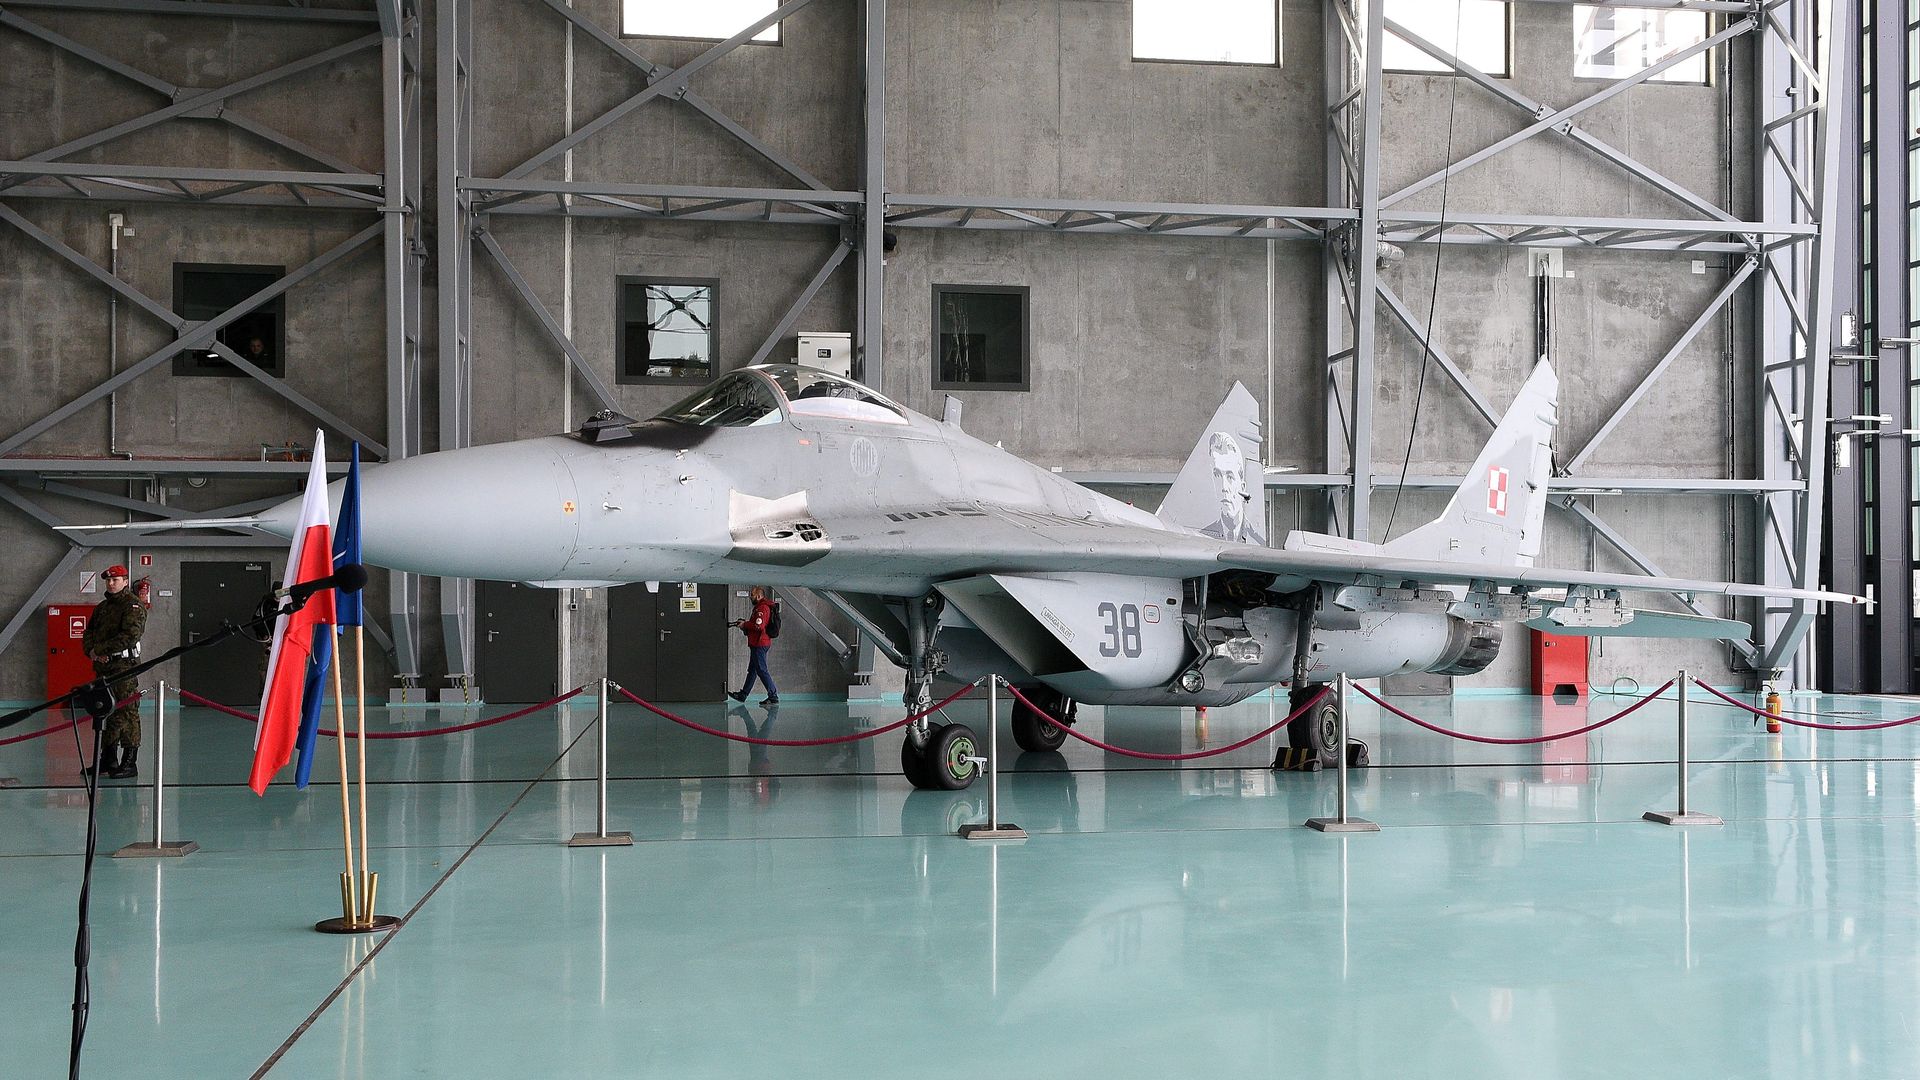 A Polish MiG-29 fighter is seen in a hangar in Warsaw.